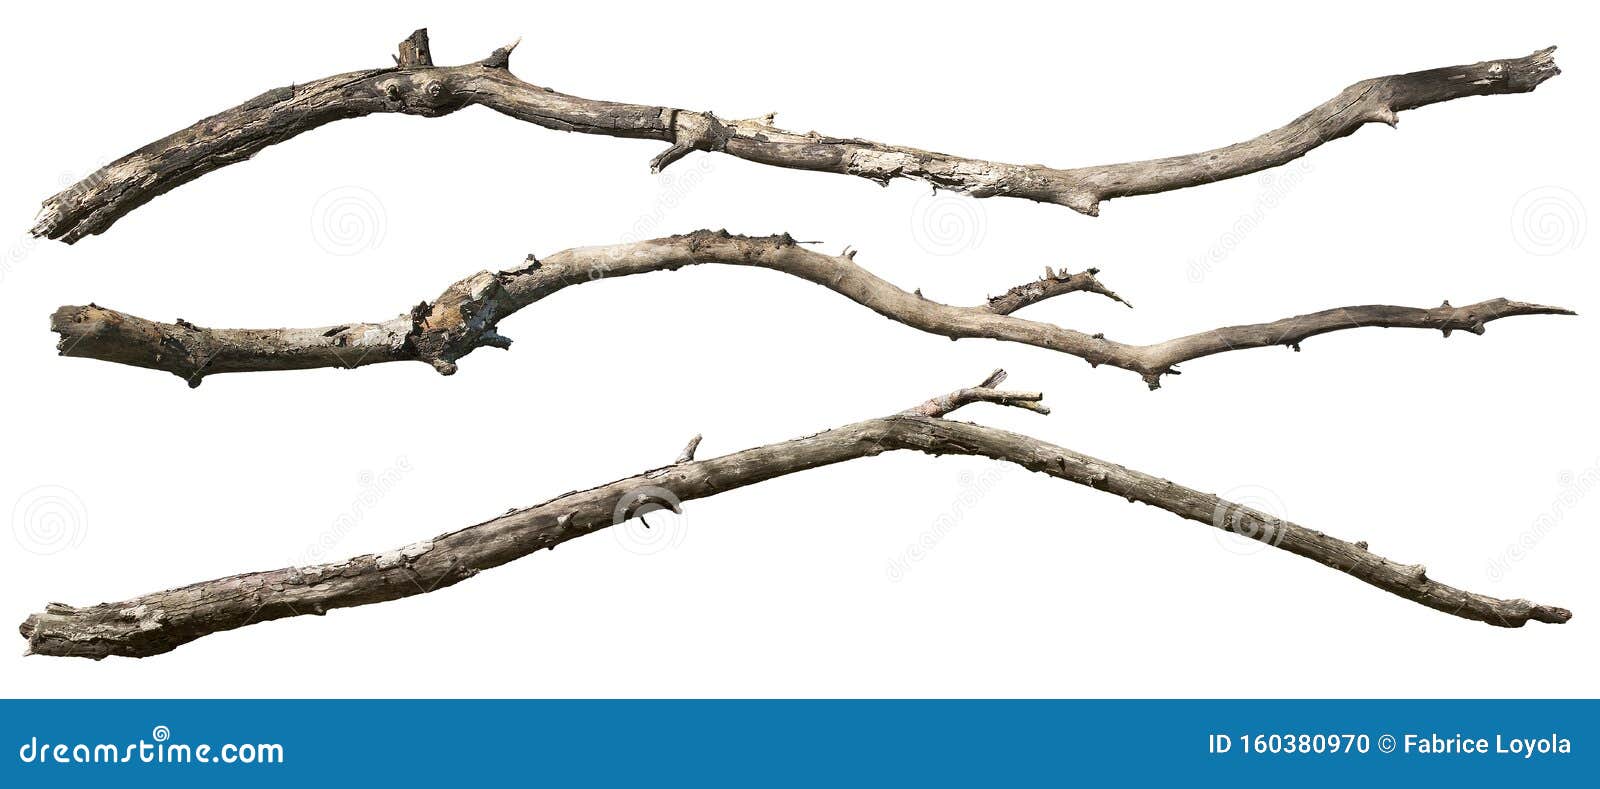 tree branch png